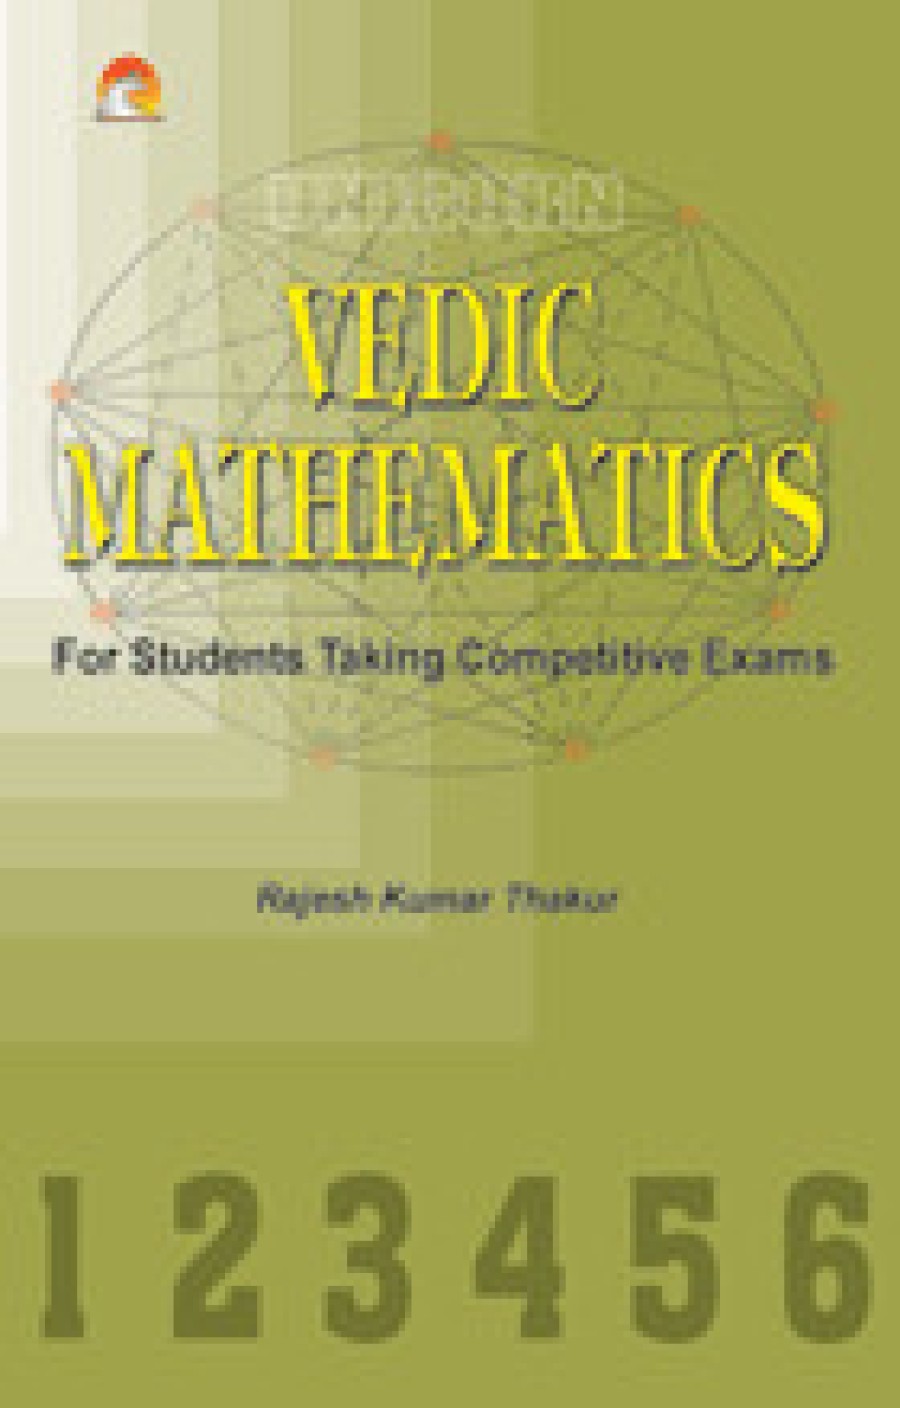 vedic maths research papers